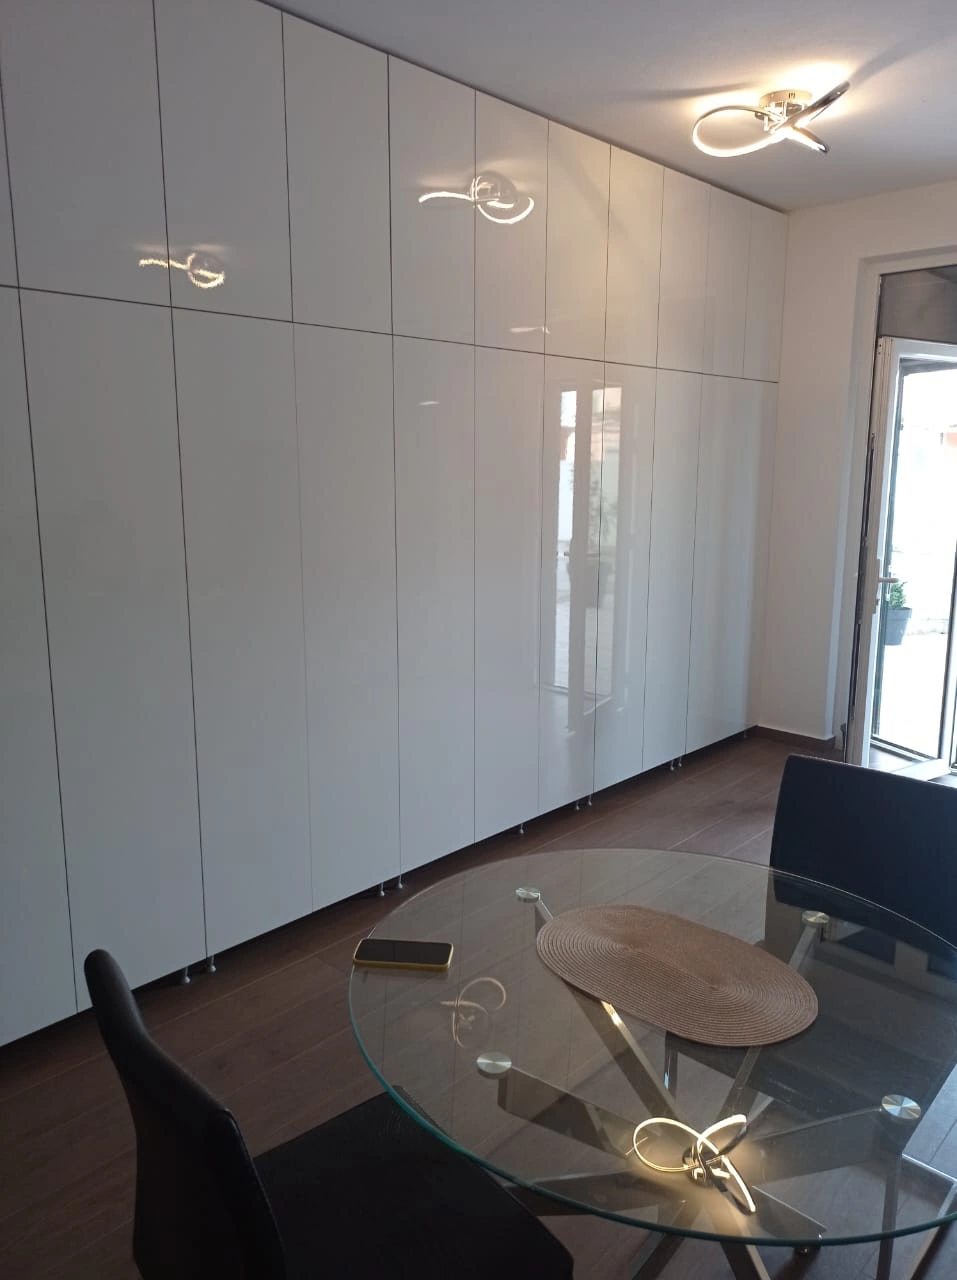 New 1 bedroom apartment 47m2 on the ground floor with own parking plac